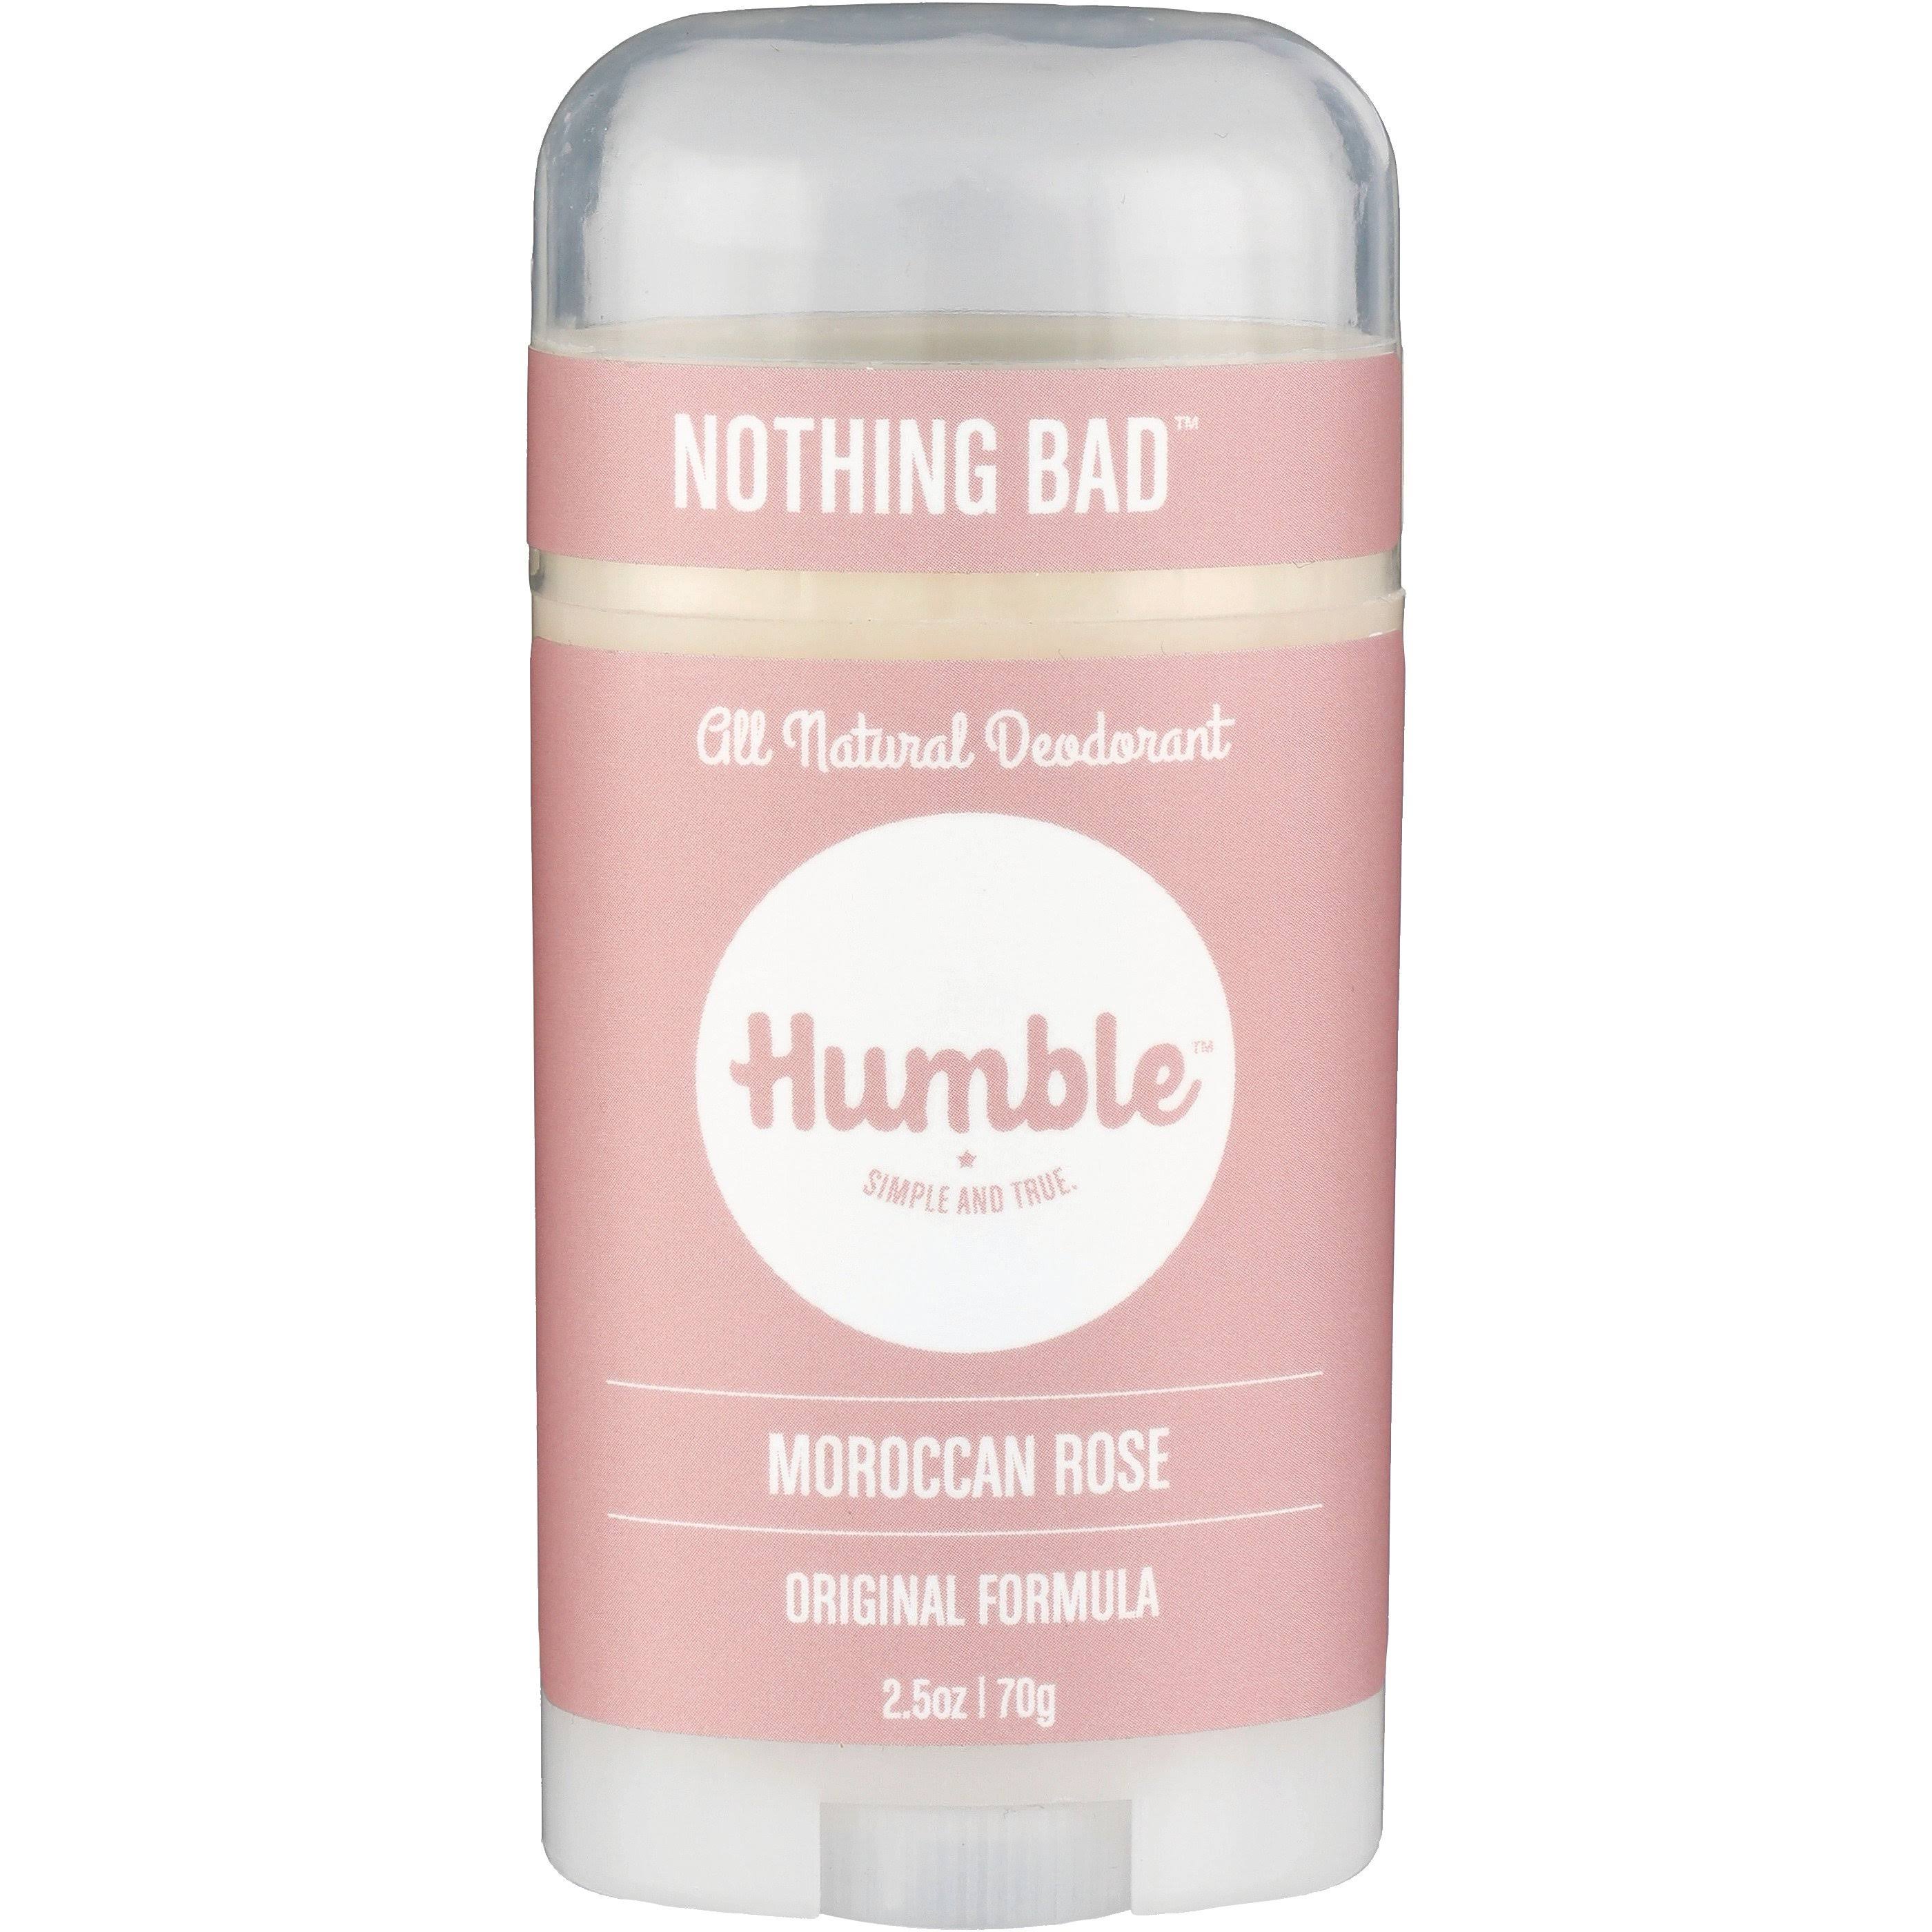 Humble Nothing Bad Deodorant, All Natural, Moroccan Rose - 2.5 oz